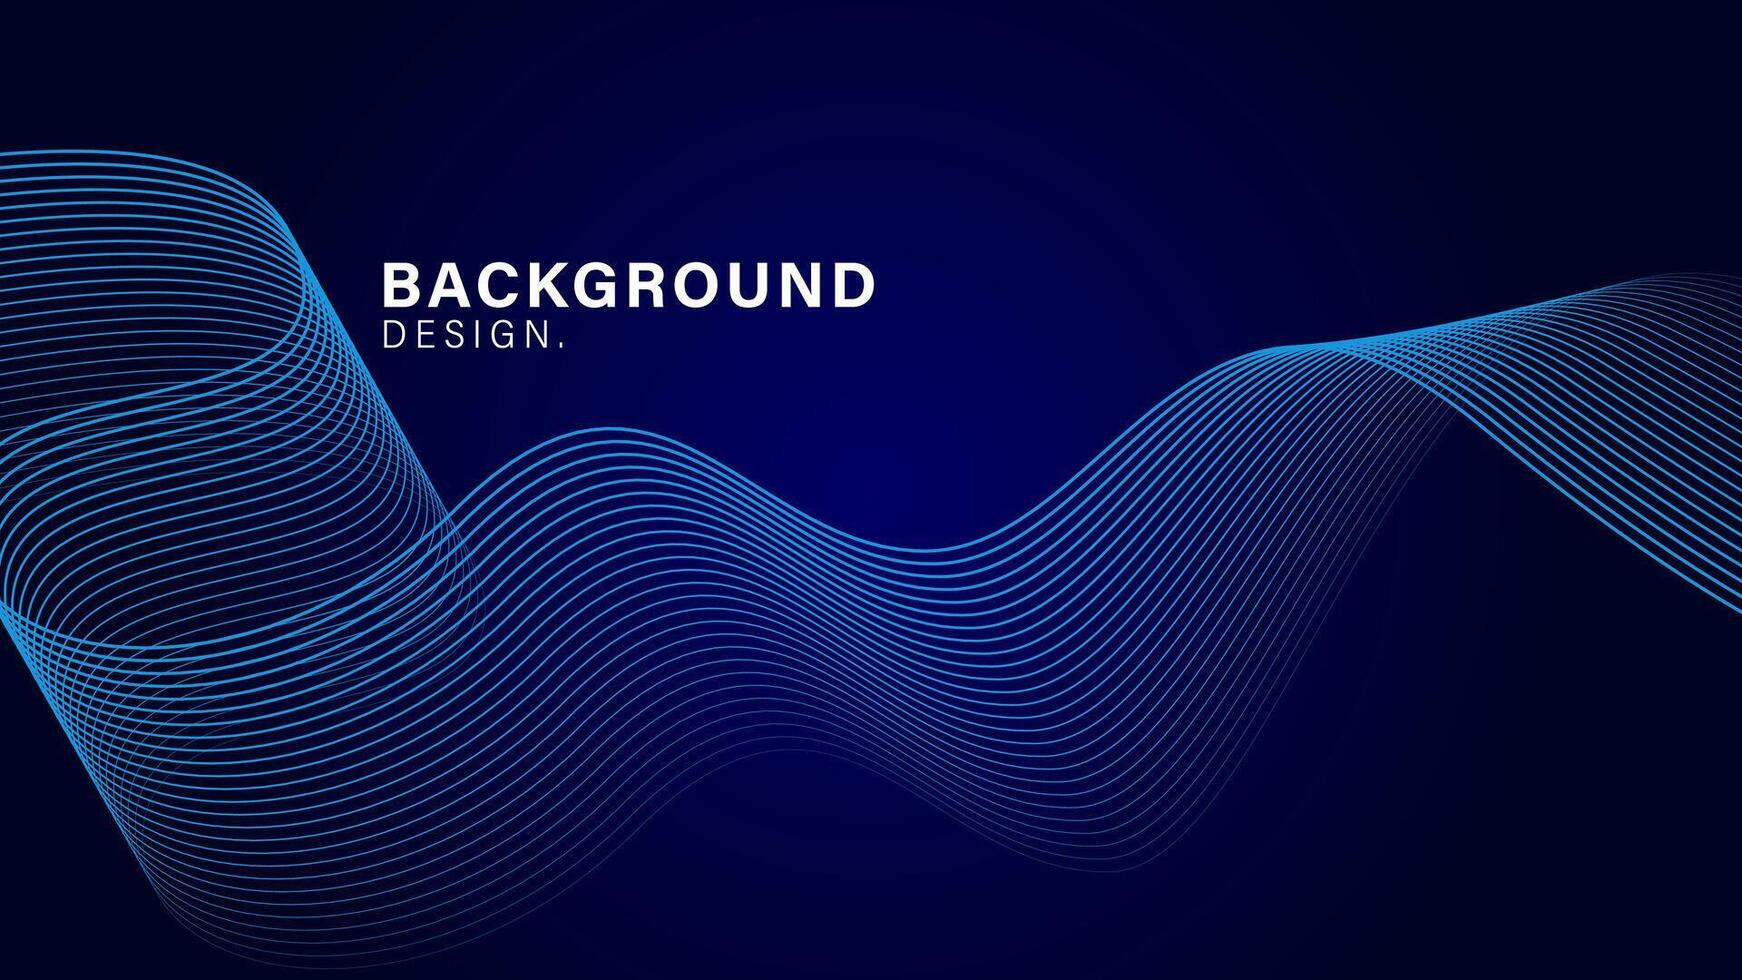 Technology background dark blue color with glowing wavy futuristic lines. Suitable for banners, posters, wallpapers, covers. Vector illustration